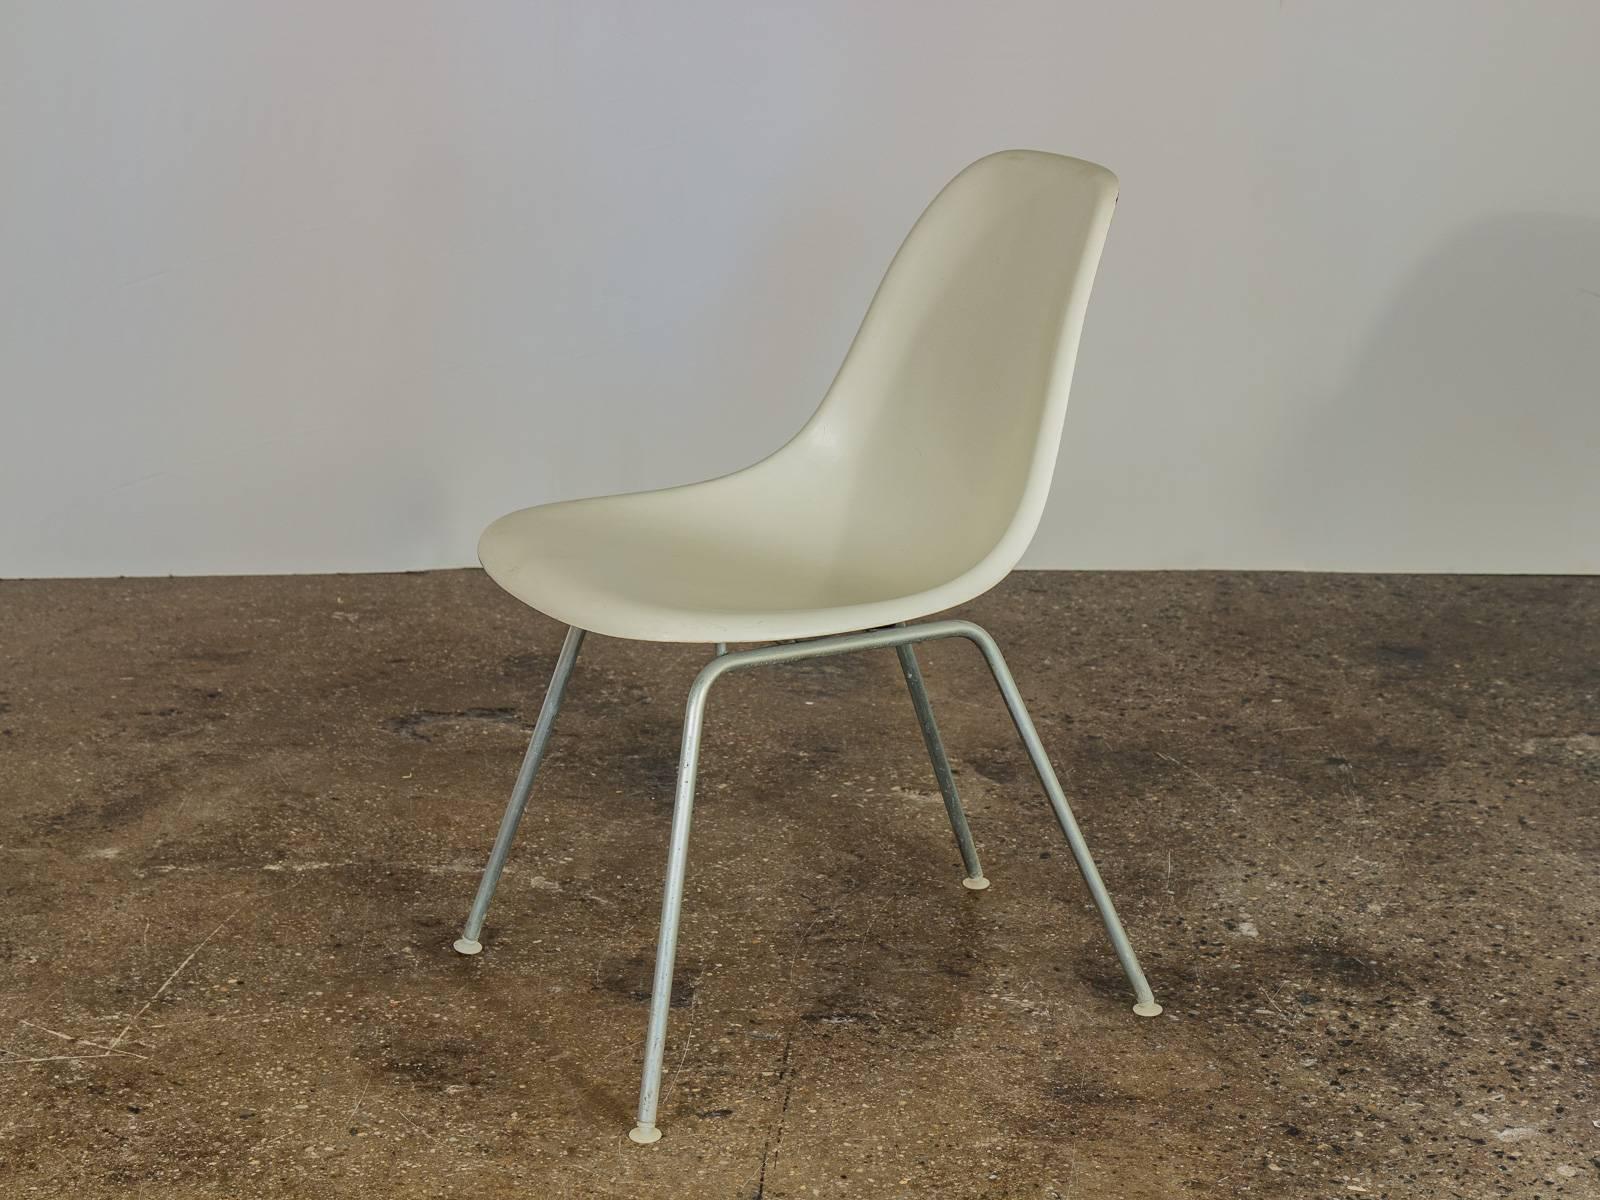 Original 1960s molded fiberglass shell chairs in white, designed by Charles and Ray Eames for Herman Miller. Gleaming shells are in original condition, each with a distinct thready texture.  Shown here mounted on vintage H base, additional base